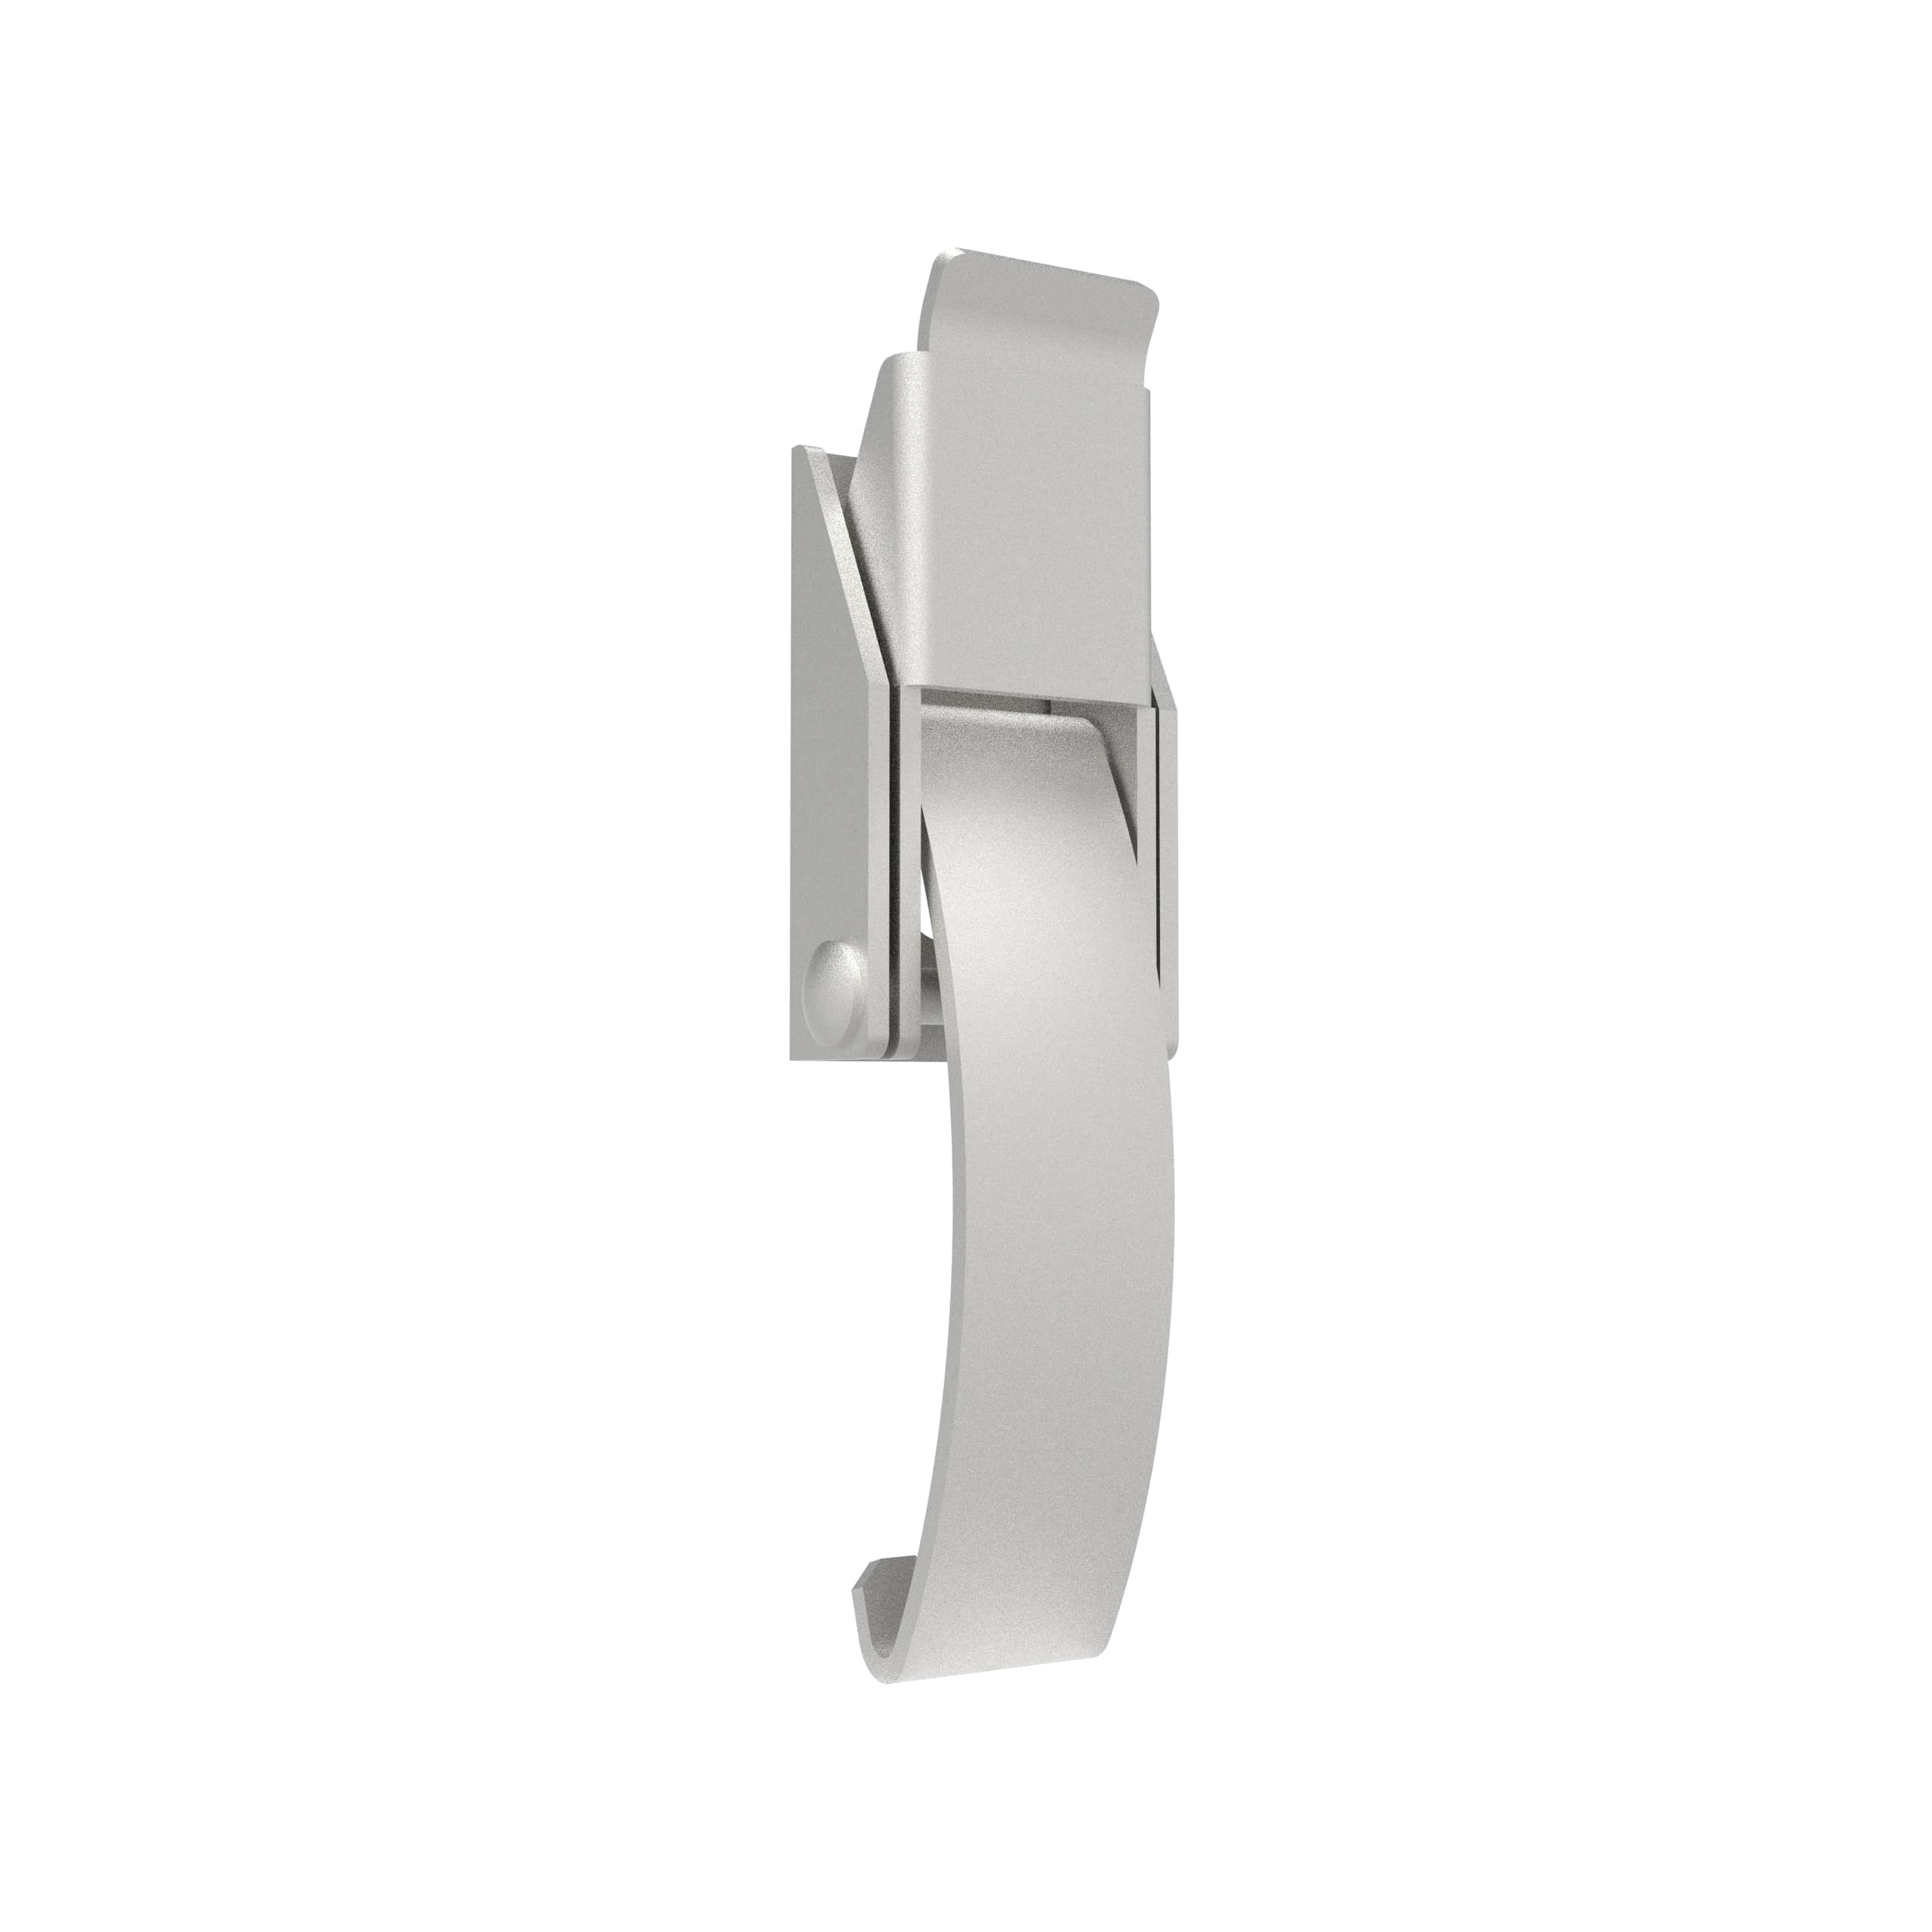 F-1640-A1 | Over-center Draw Latch Small Size, Handle Tab Up,non-padlockable , Stainless Steel, Passivated,bright